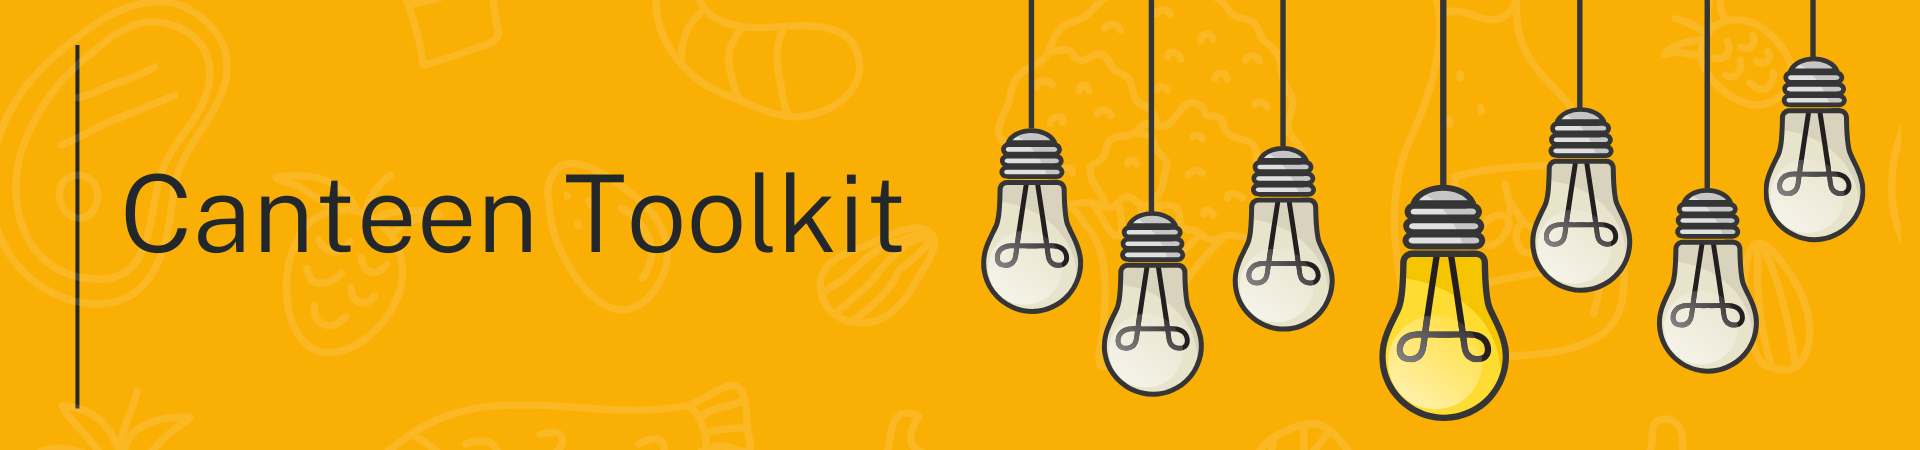 Header image. Text Canteen toolkit with yellow background and image of a lightbulb